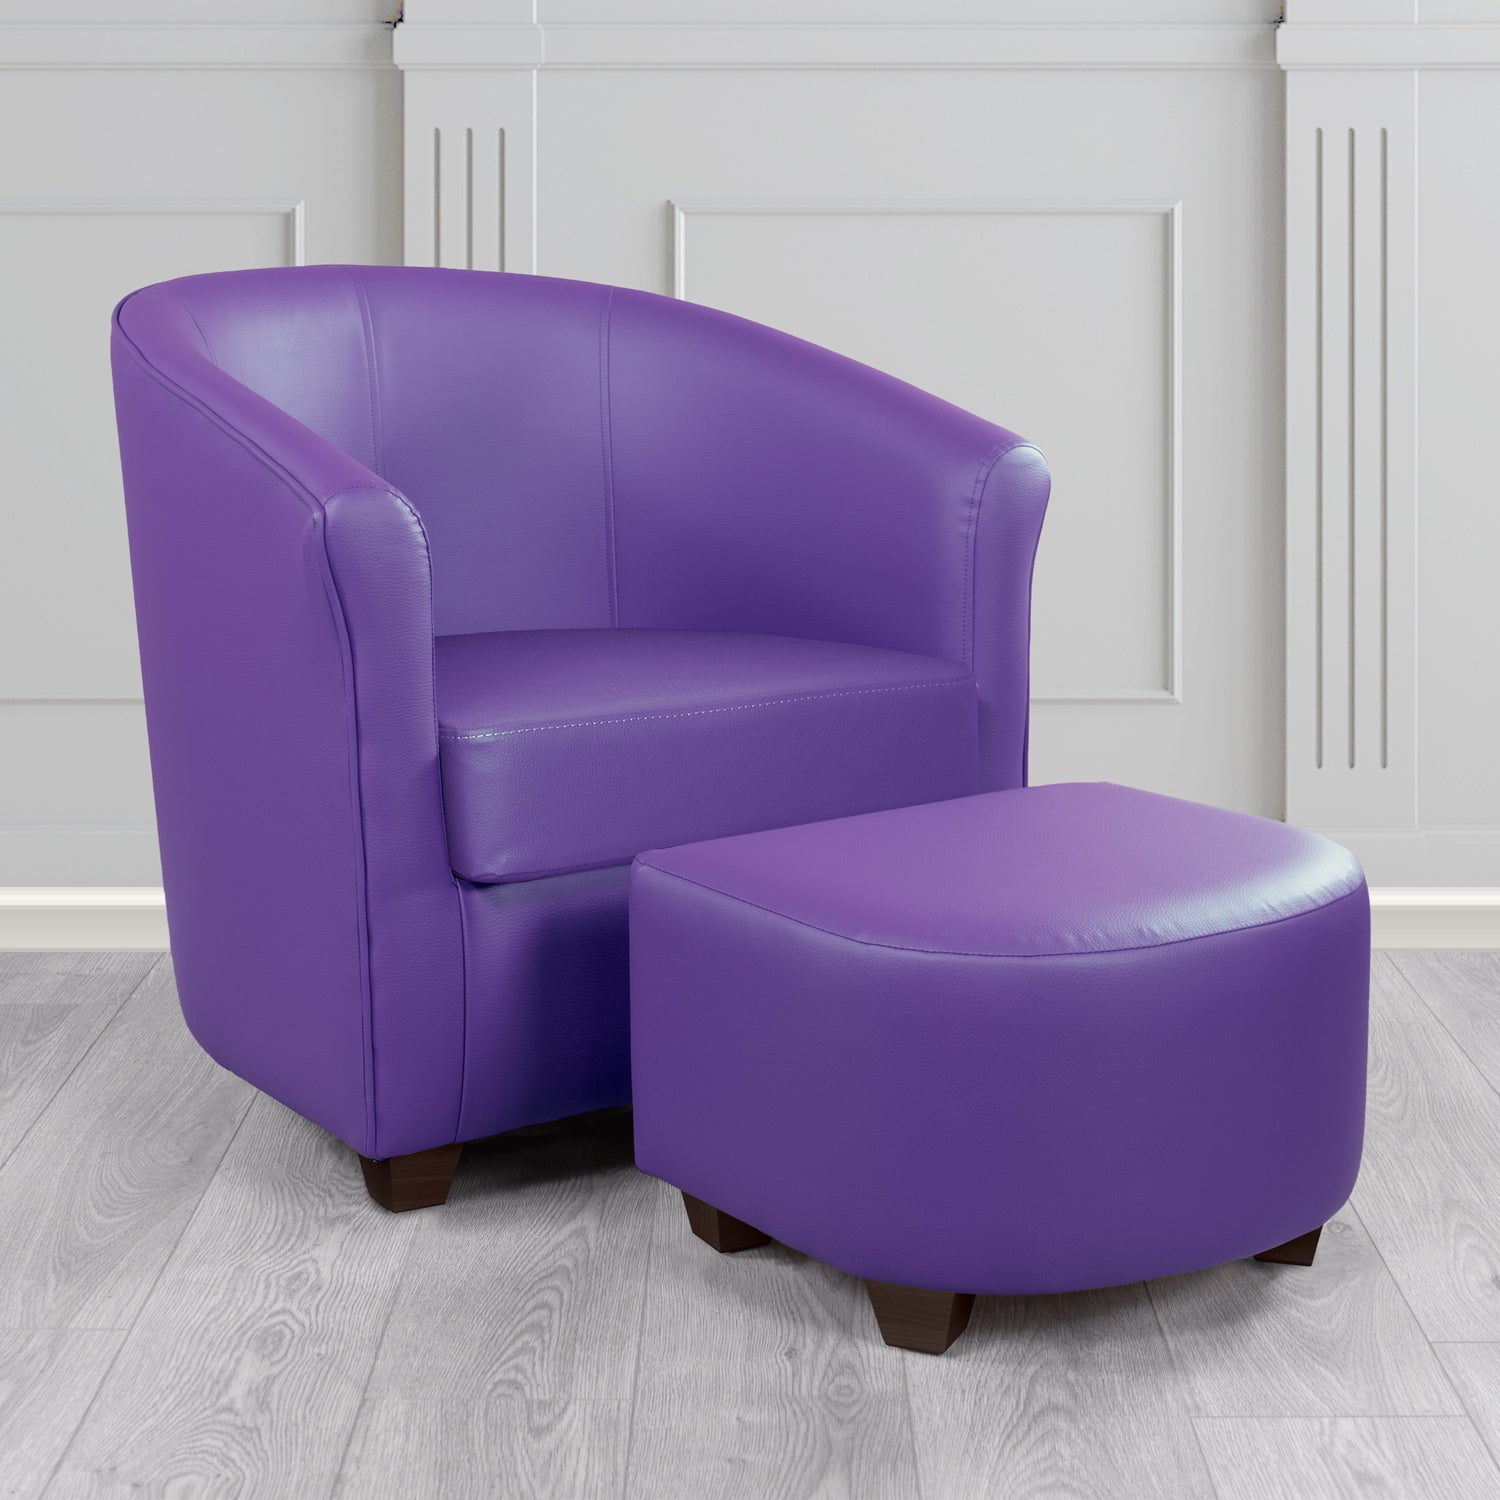 Cannes Tub Chair with Footstool Set in Just Colour Ultraviolet Crib 5 Faux Leather - The Tub Chair Shop